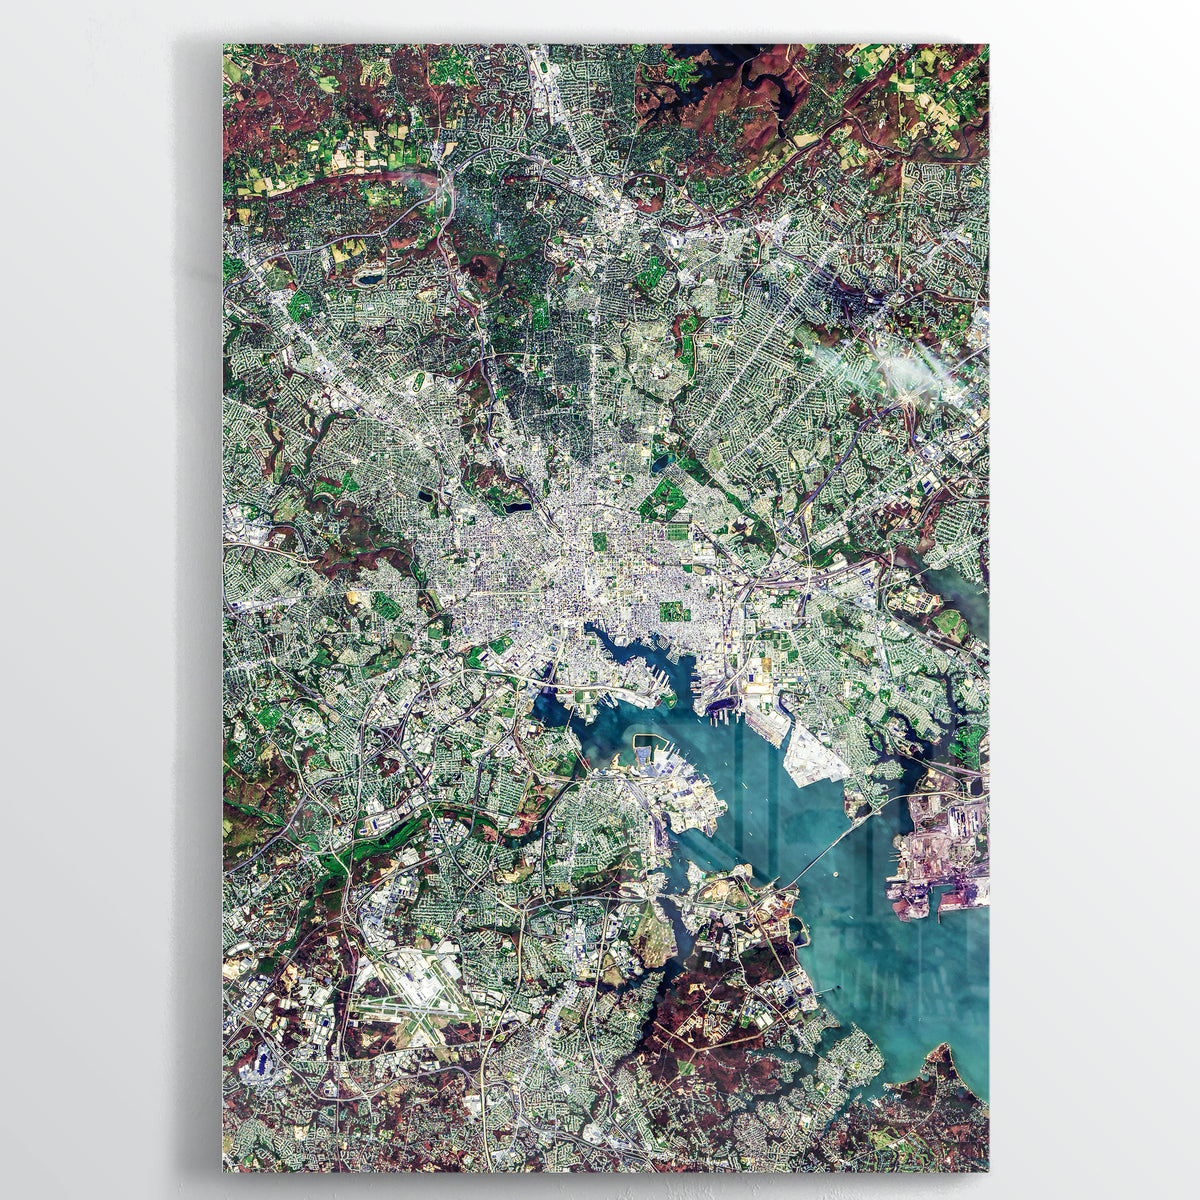 DC/Baltimore Earth Photography - Floating Acrylic Art - Point Two Design